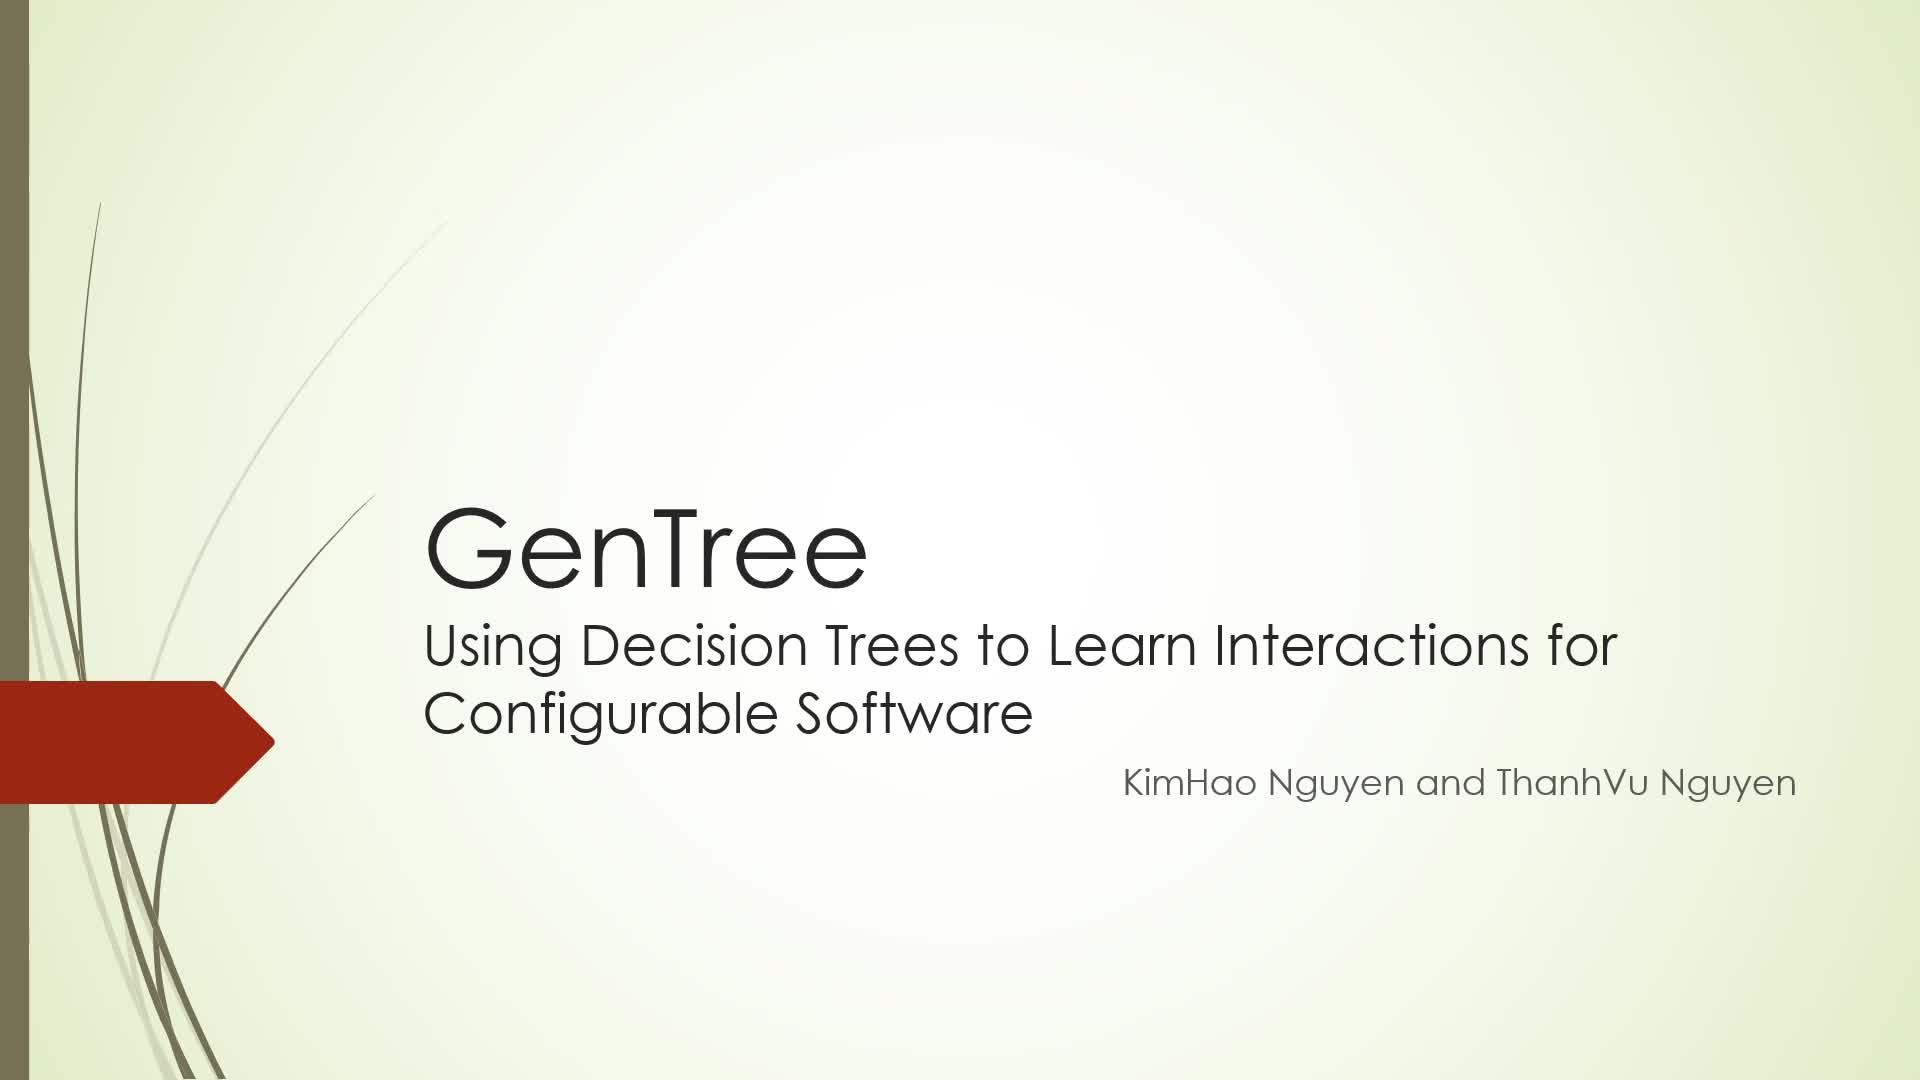 GenTree: Using Decision Trees to Learn Interactions for Configurable Software